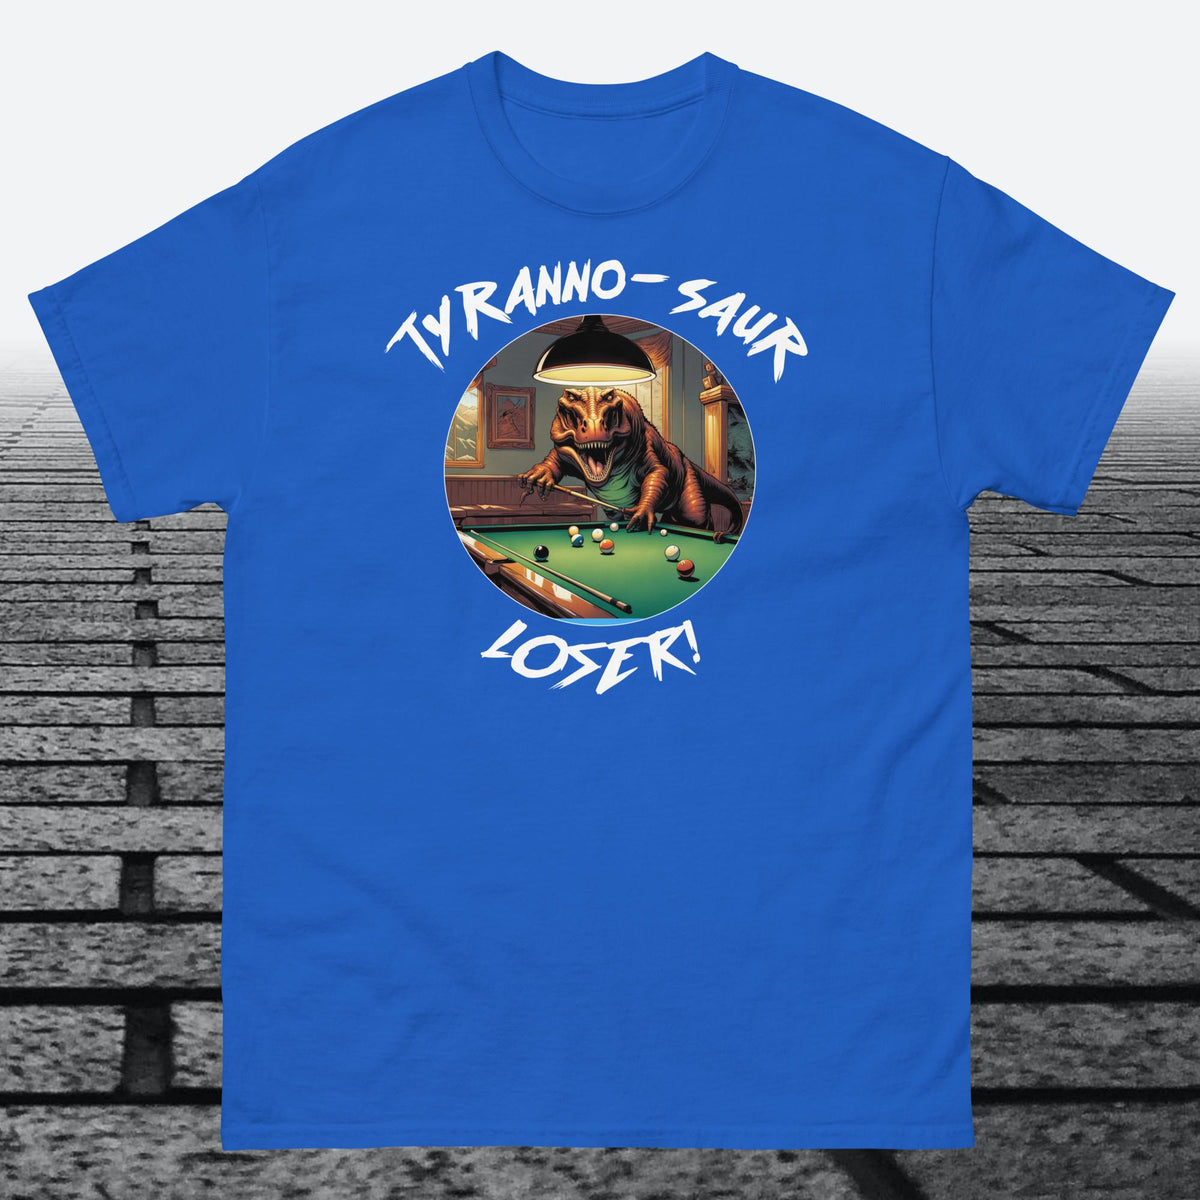 Tyranno-Saur Loser, on the front, Cotton t-shirt